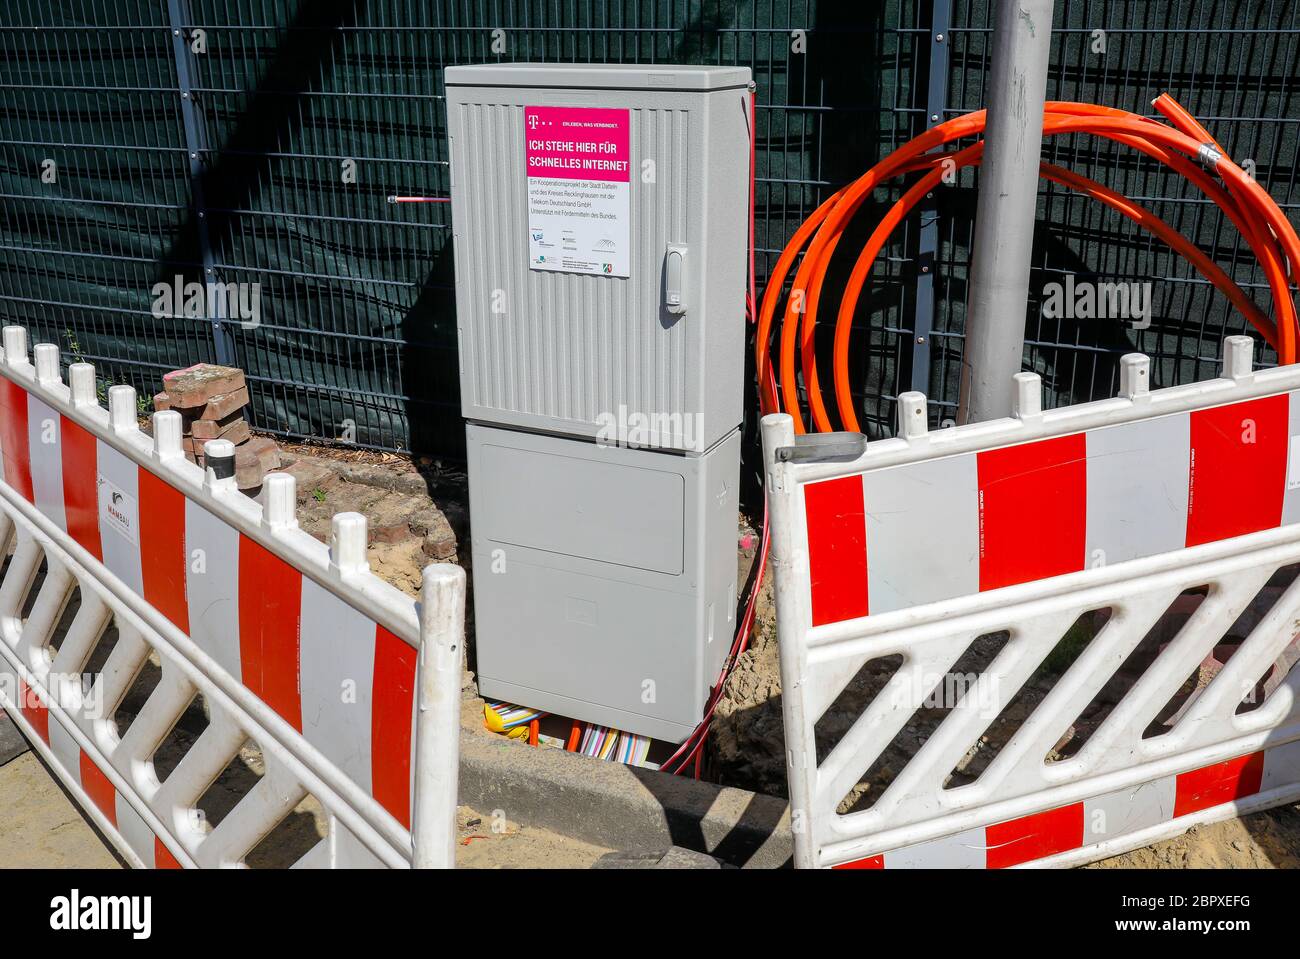 Datteln, Ruhrgebiet, Nordrhein-Westfalen, Germany - Telekom distribution box for fast internet, construction site DSL cable connection for households. Stock Photo